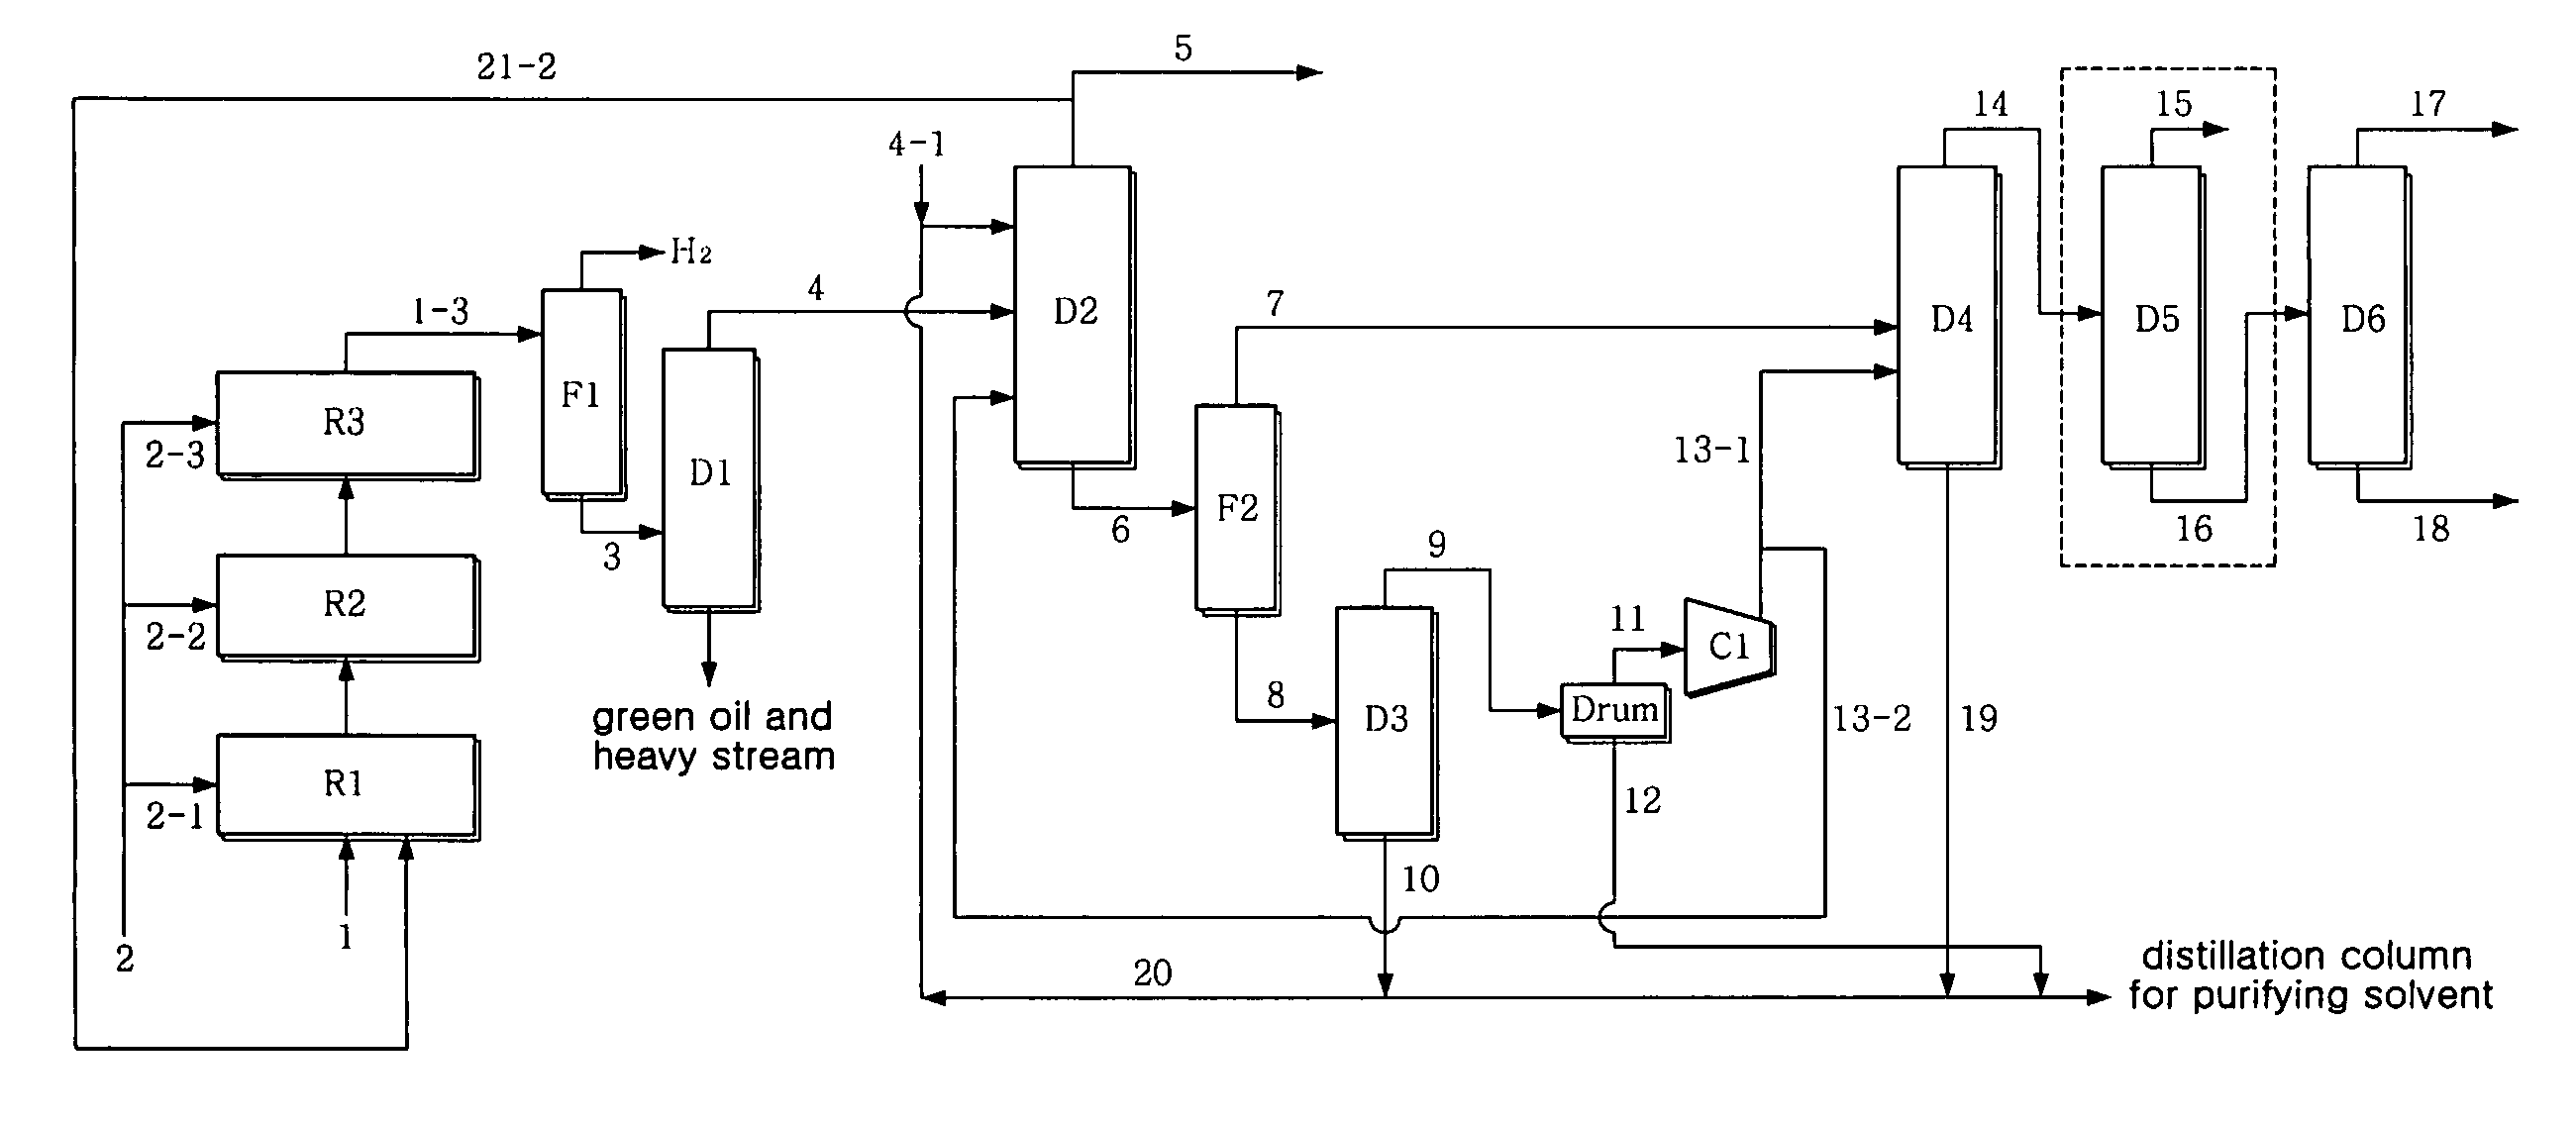 Process for 1,3-butadiene separation from a crude C4 stream with acetylene converter